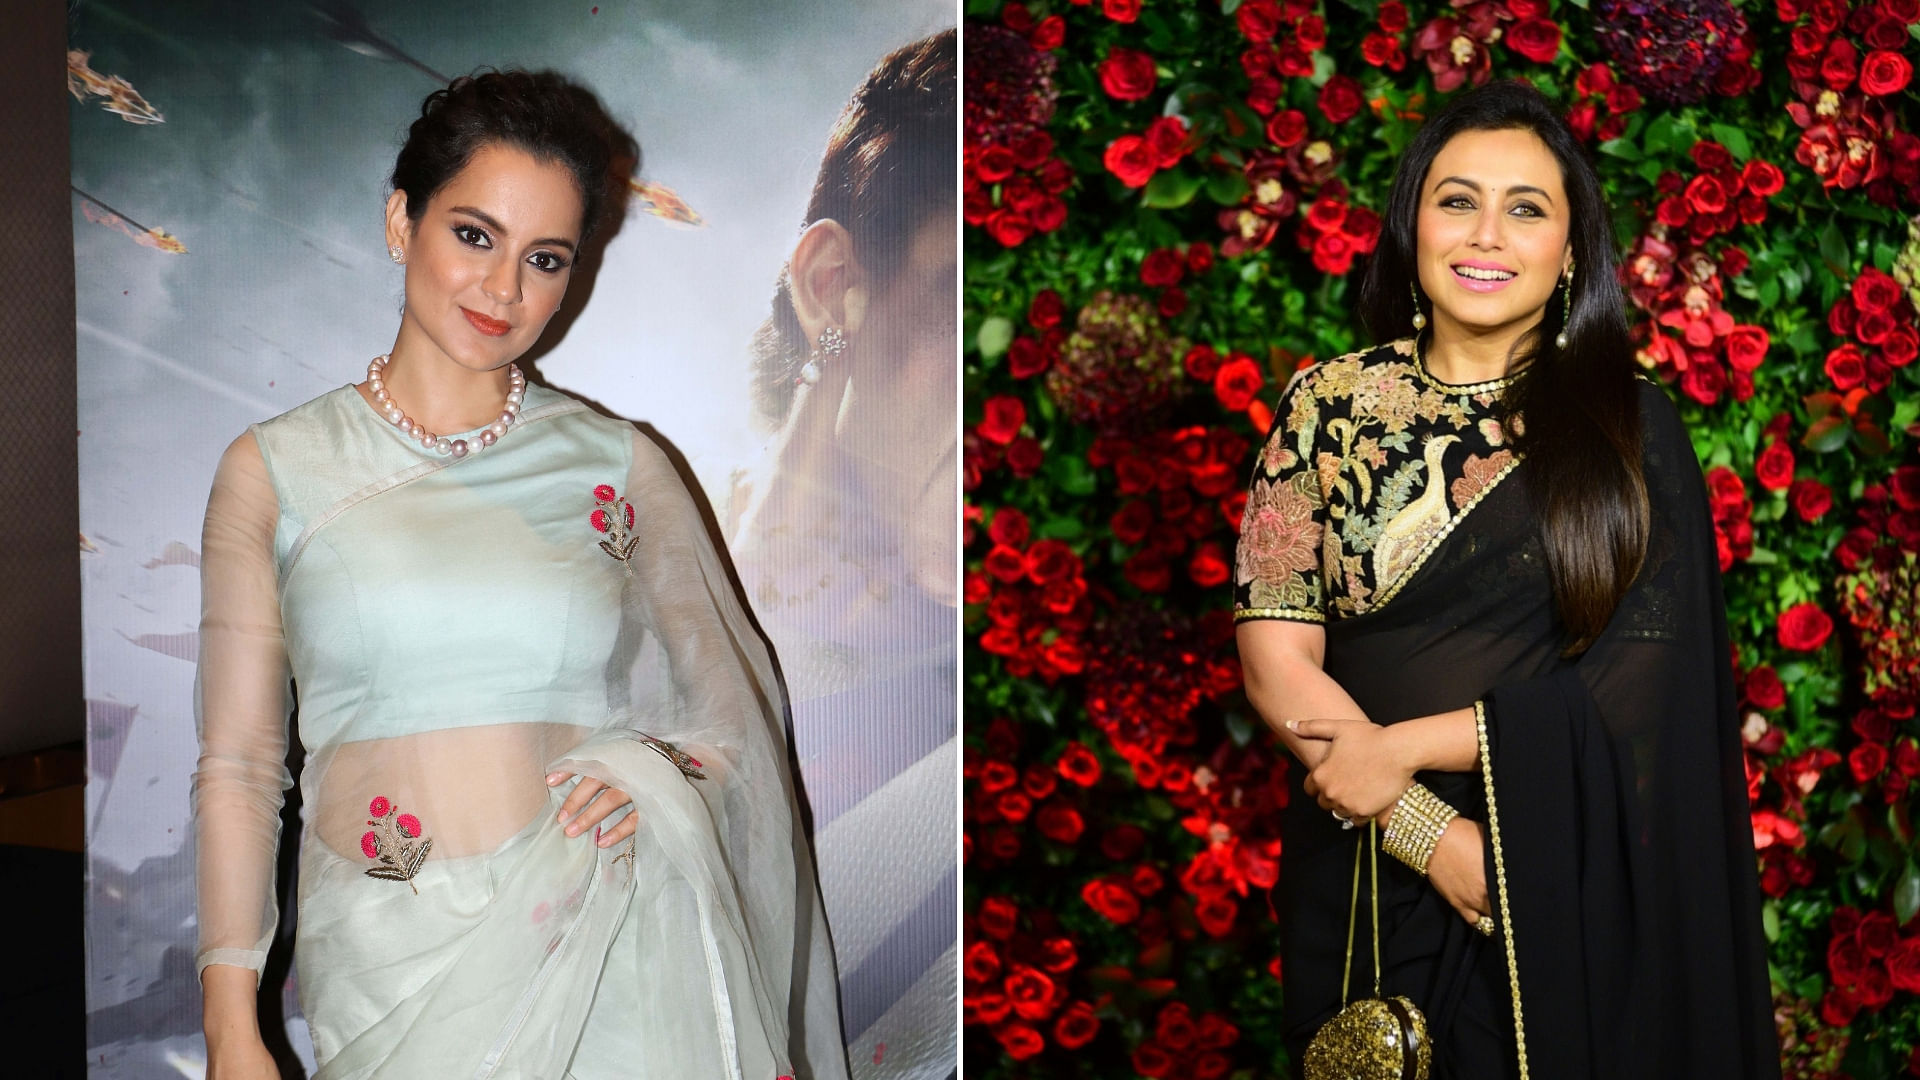 Kangana Ranaut has weighed in on Rani’s comments on #MeToo